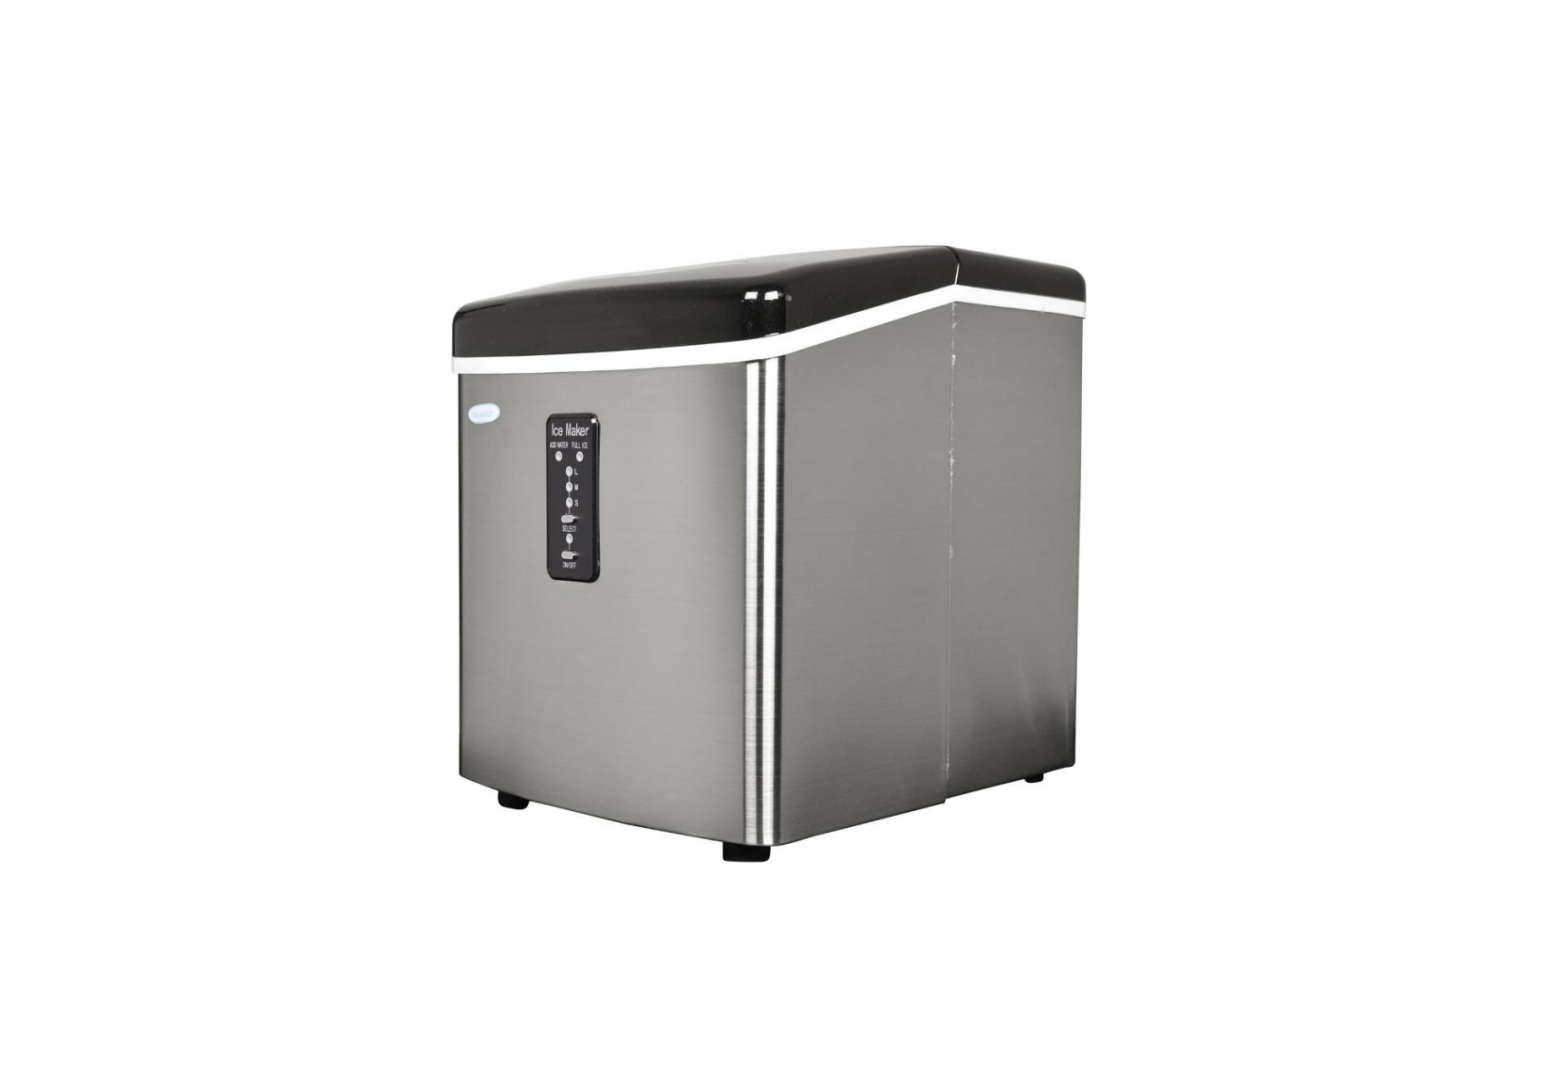 newair AI-100SS Portable Countertop Ice Maker Owner’s Manual